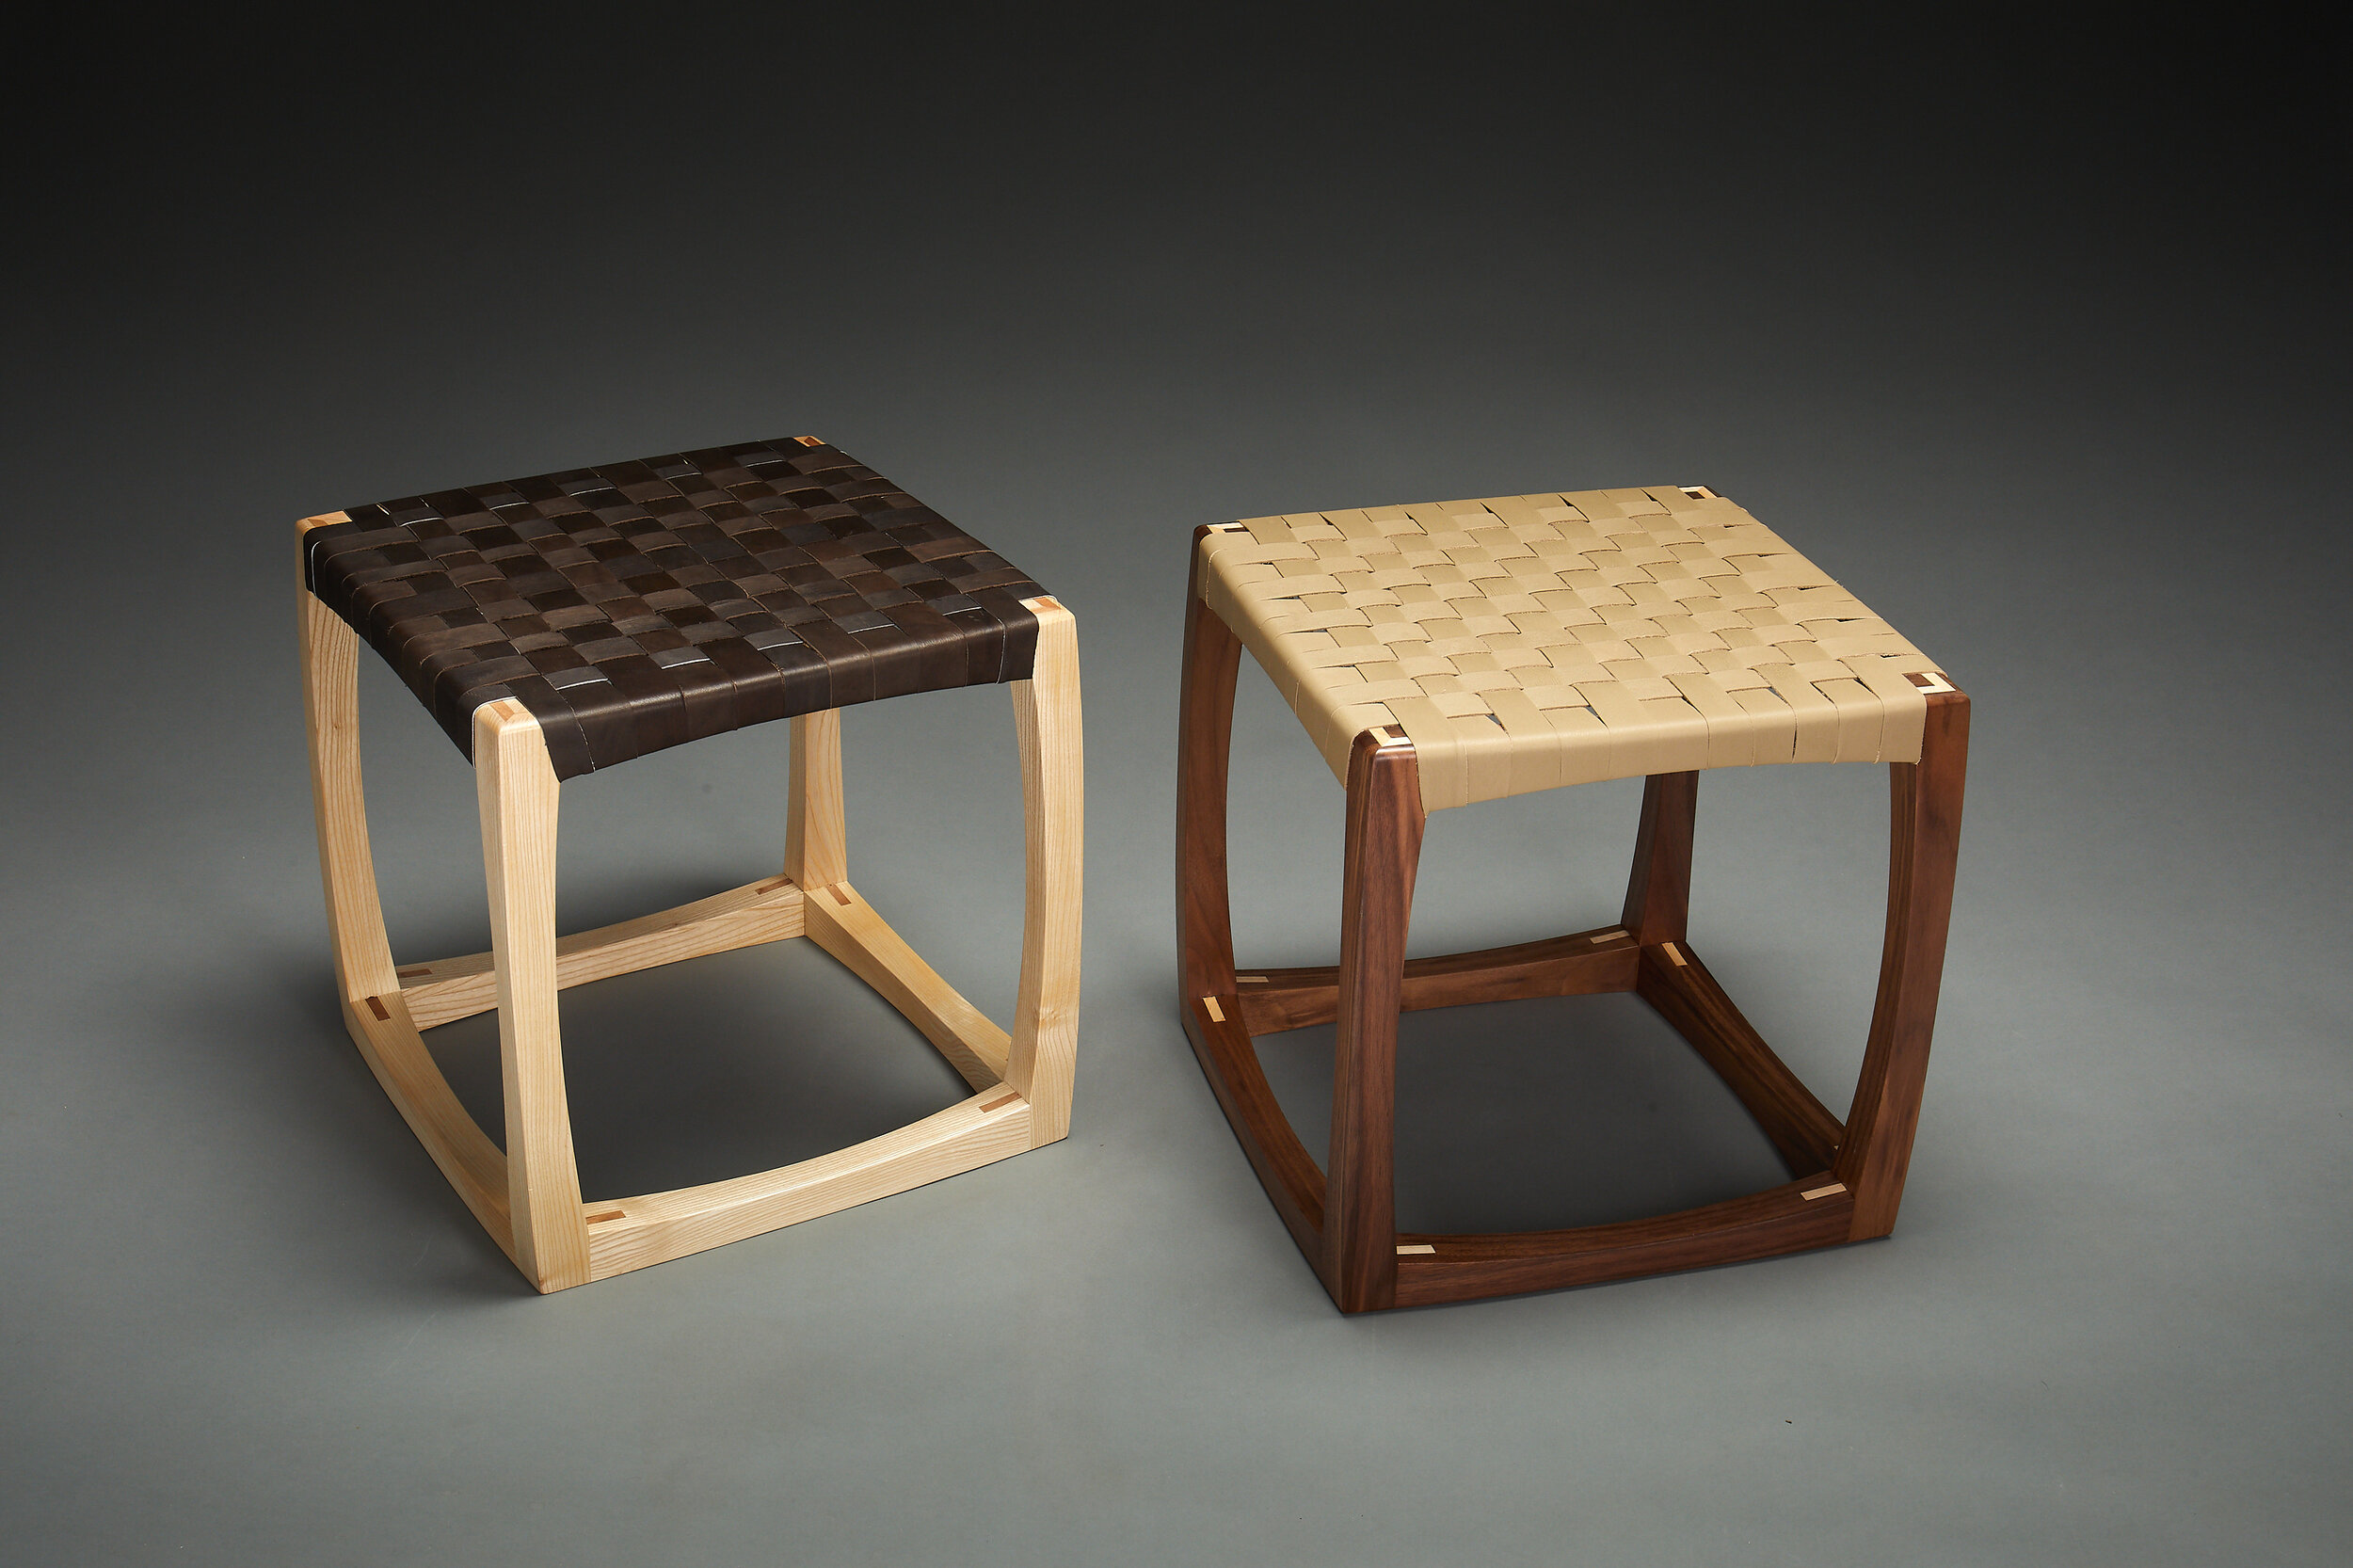 Cube chairs